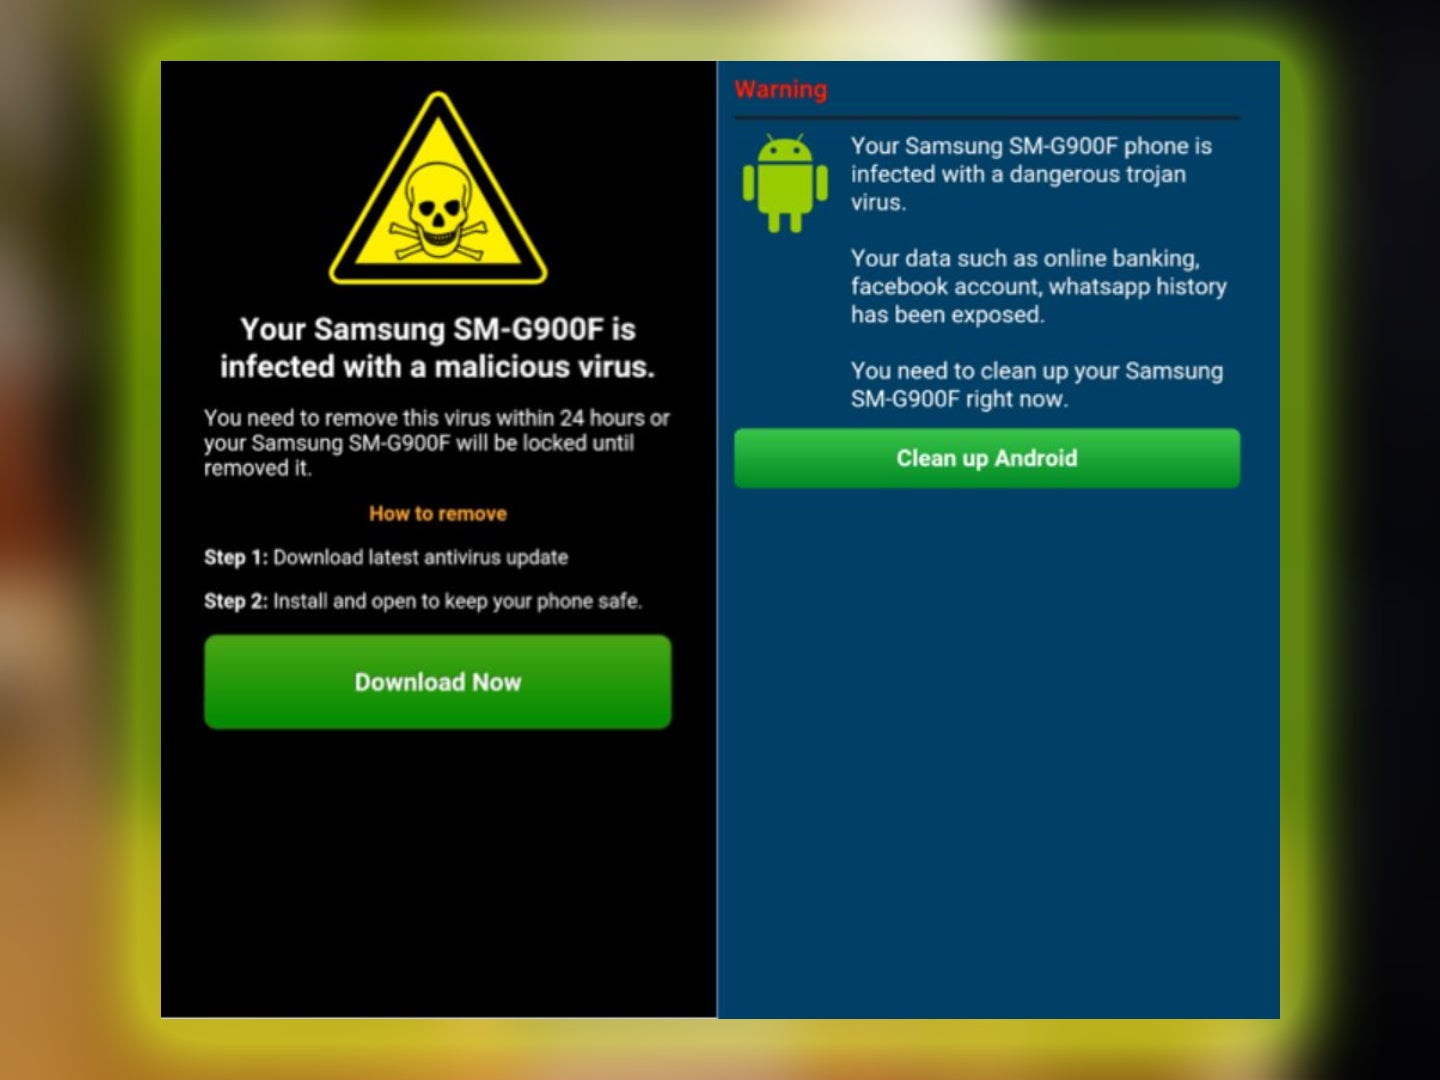 Messages like this have been around ever since Android surfaced and while their aesthetics have changed, the core message has remained the same. - Malware apps on Android? Do this to keep your phone safe